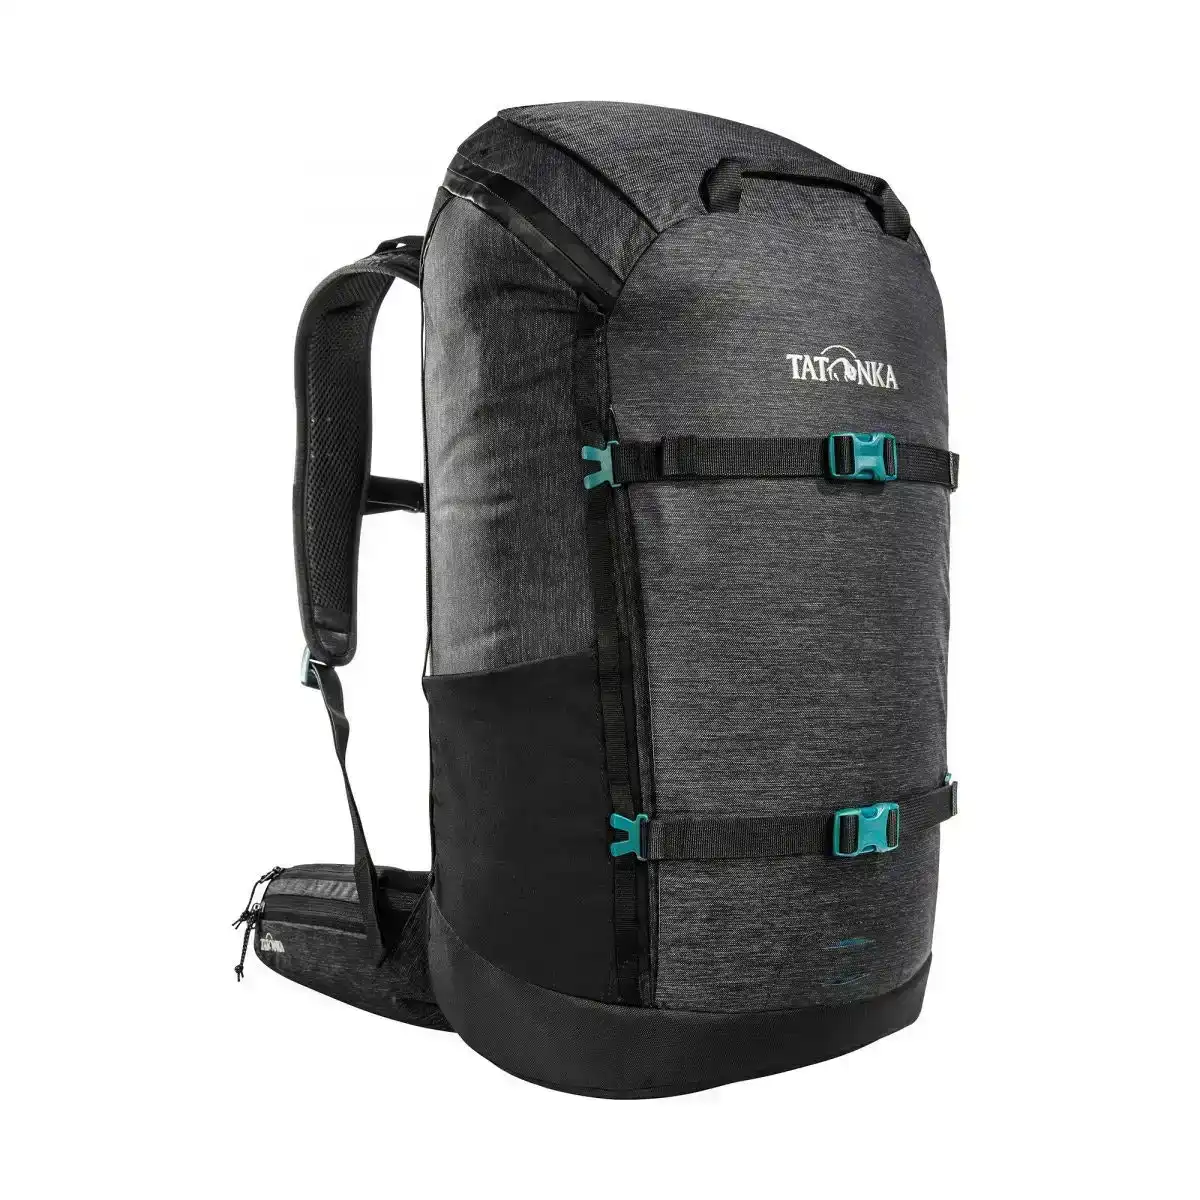 Tatonka City Pack 30L Backpack Hip/Chest Belt Laptop Compartment Storage Off BLK